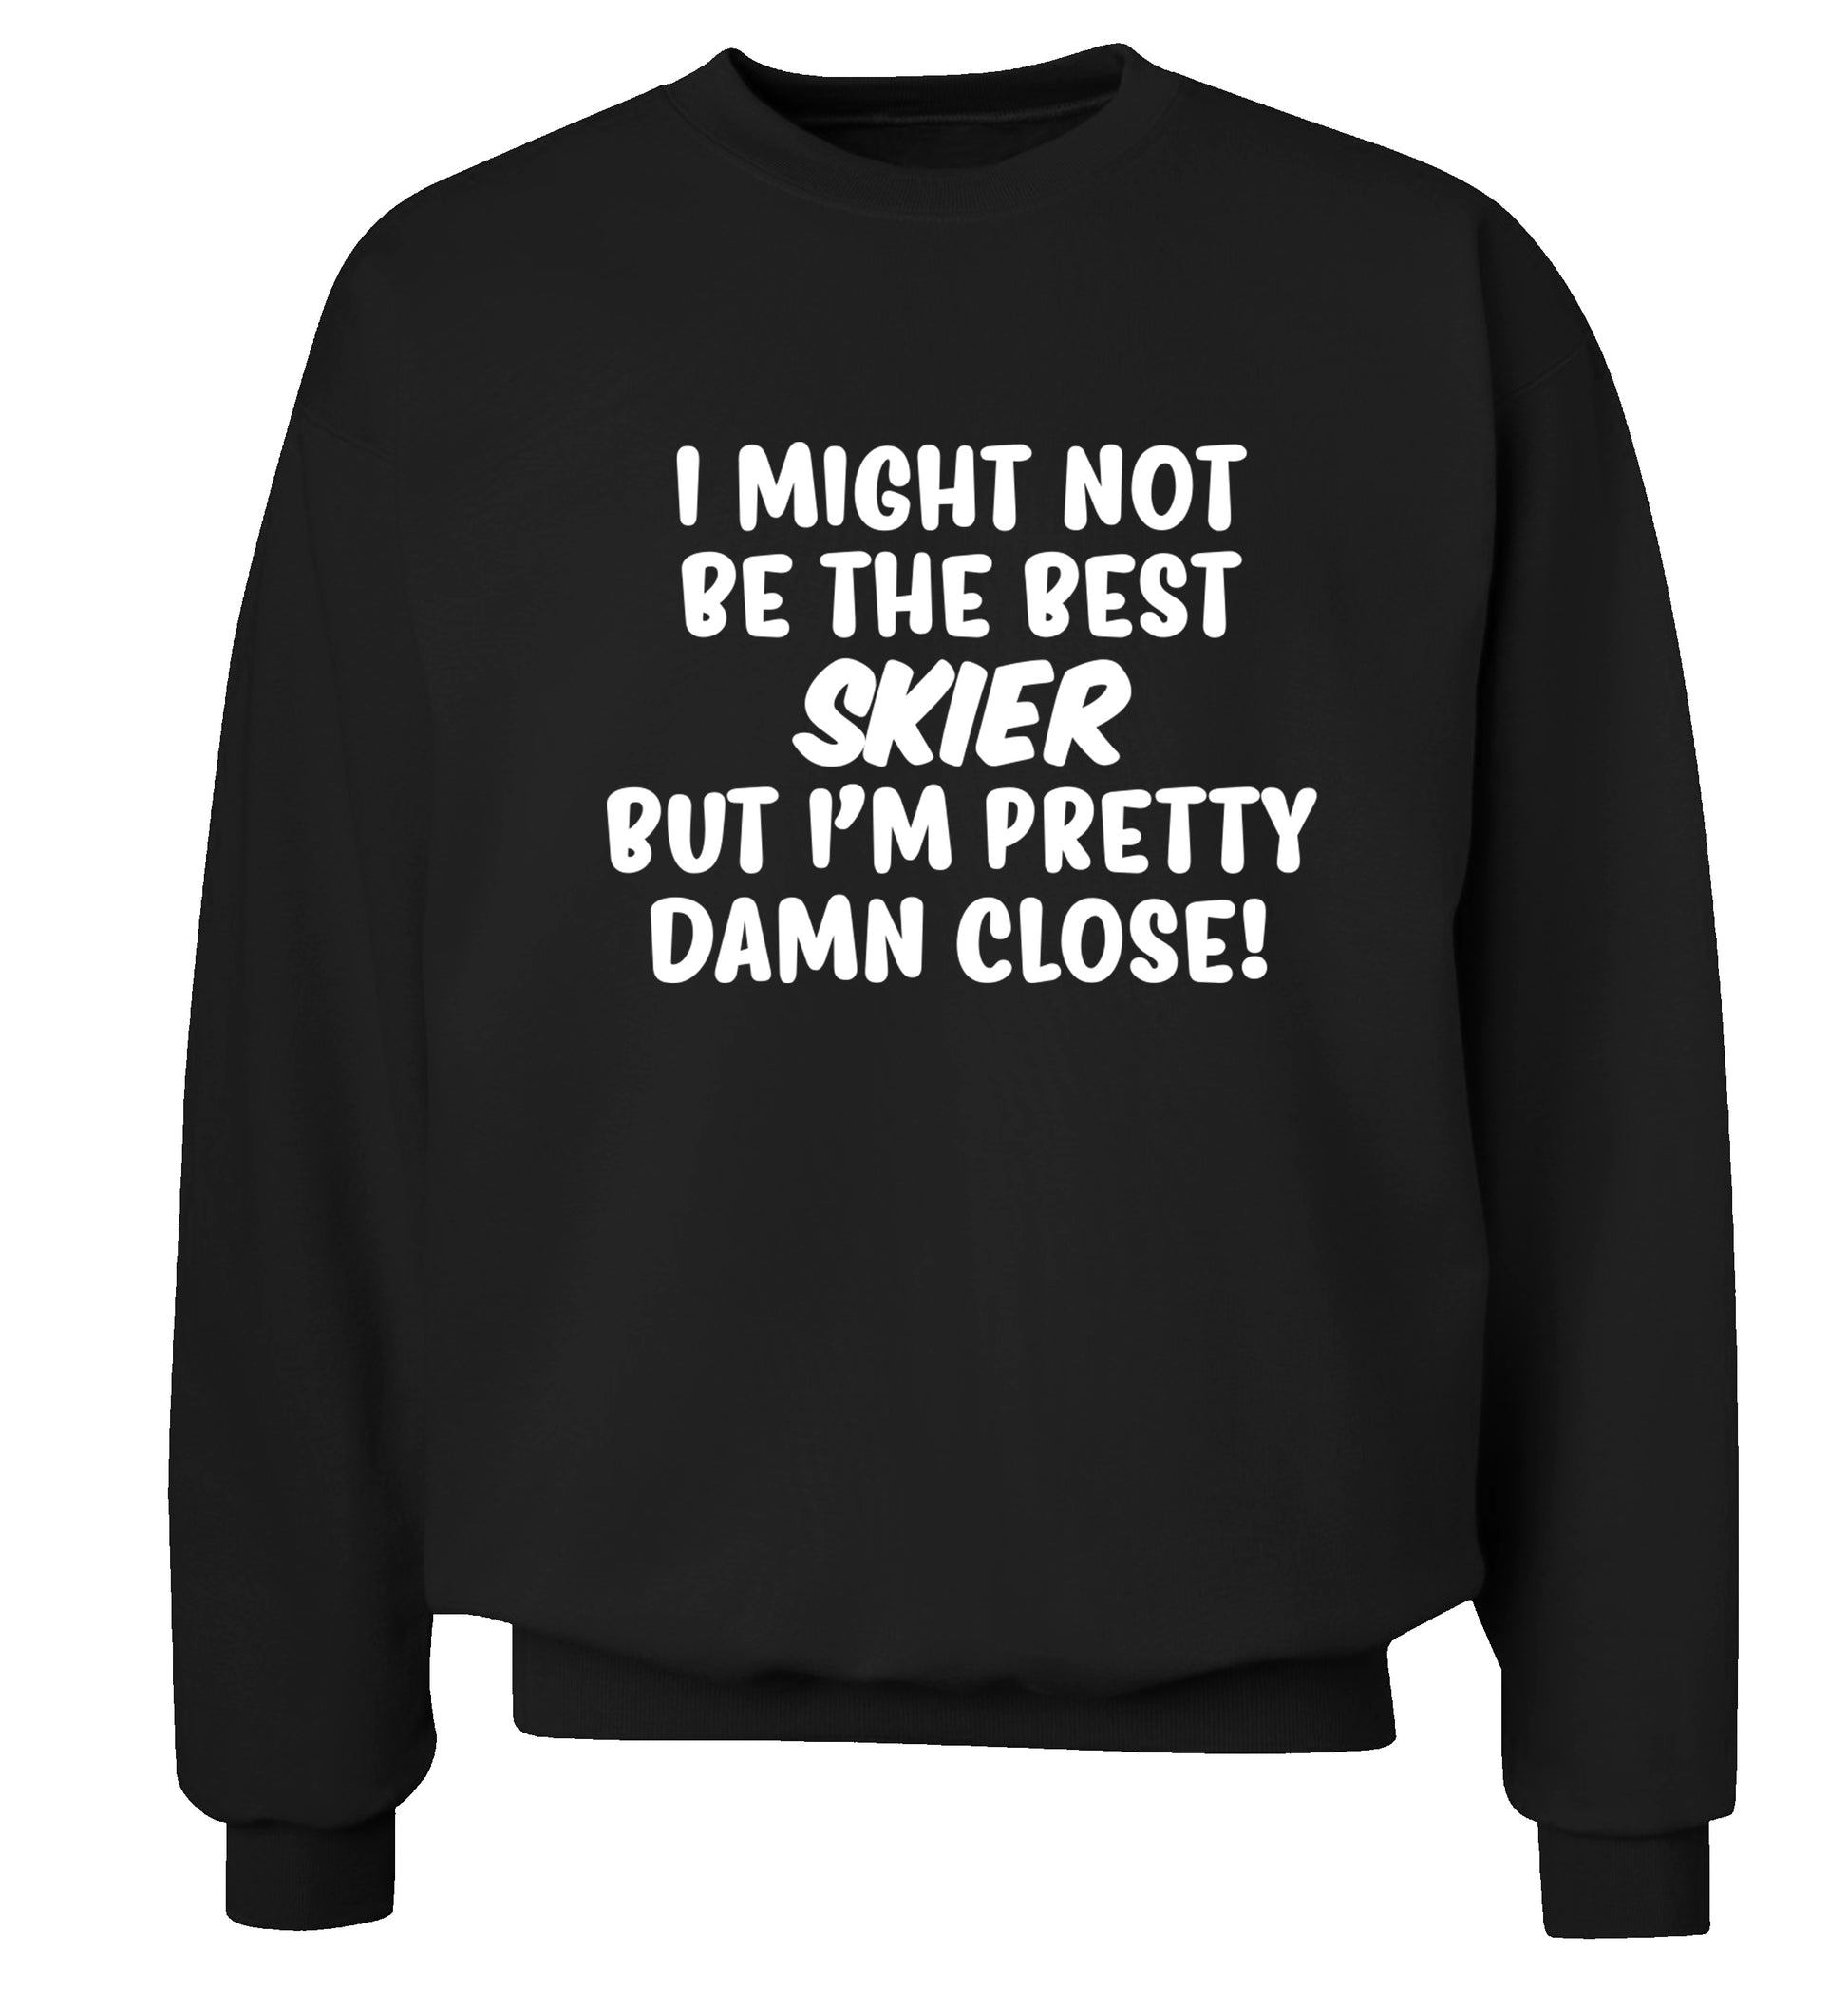 I might not be the best skier but I'm pretty damn close! Adult's unisexblack Sweater 2XL